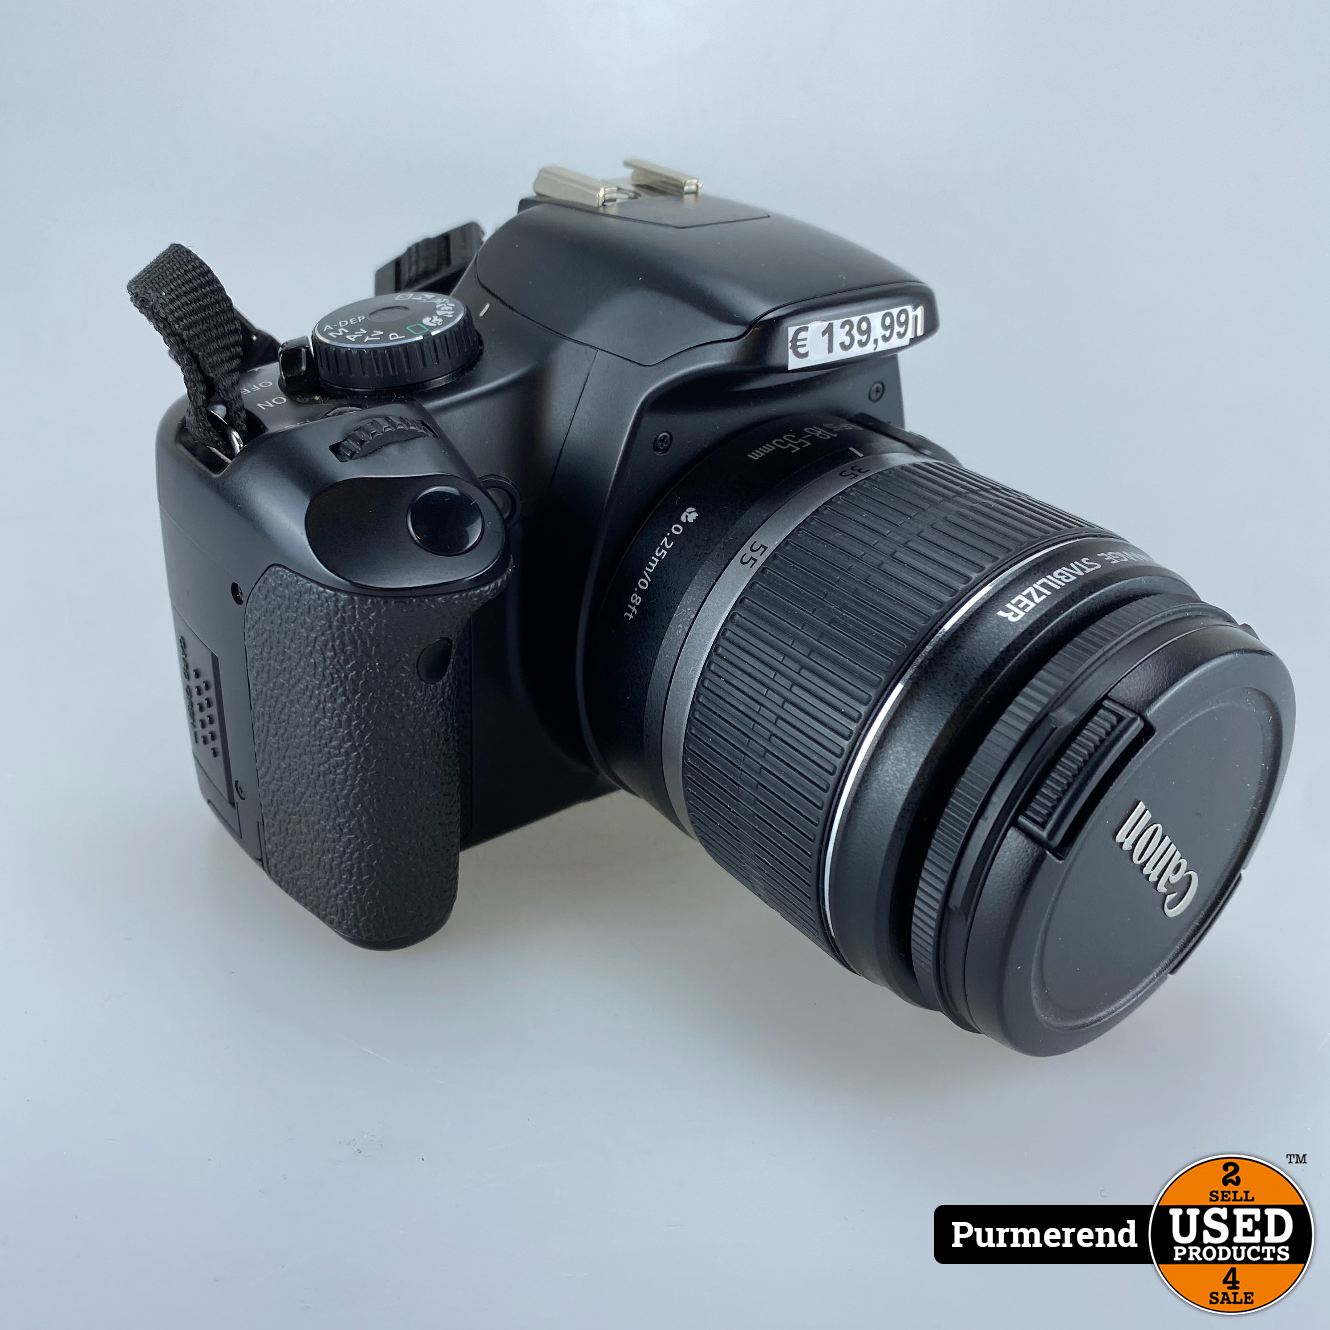 Canon EOS 450D Spiegelreflex Camera + - Used Products Purmerend